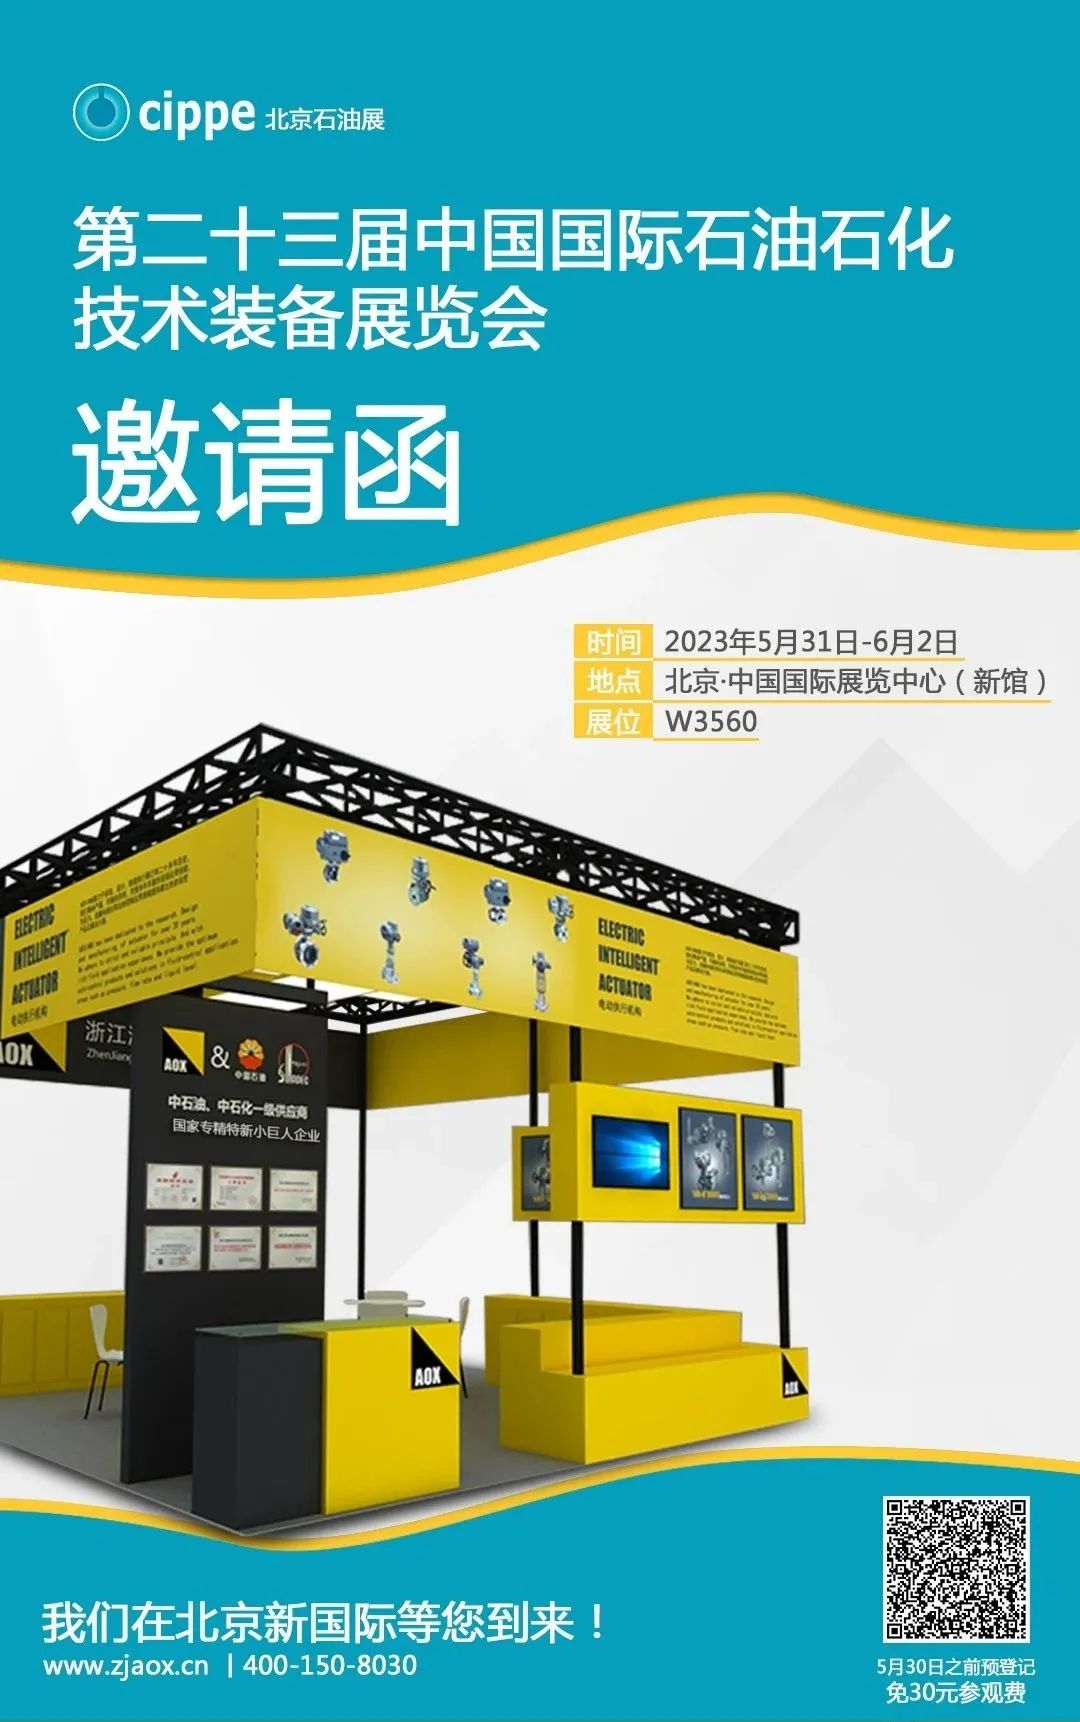 Invitation Letter: From May 31 to June 2, 2023, the 23rd China International Petroleum and Petrochemical Technology and Equipment Exhibition, Zhejiang Aoxiang invites you to come!